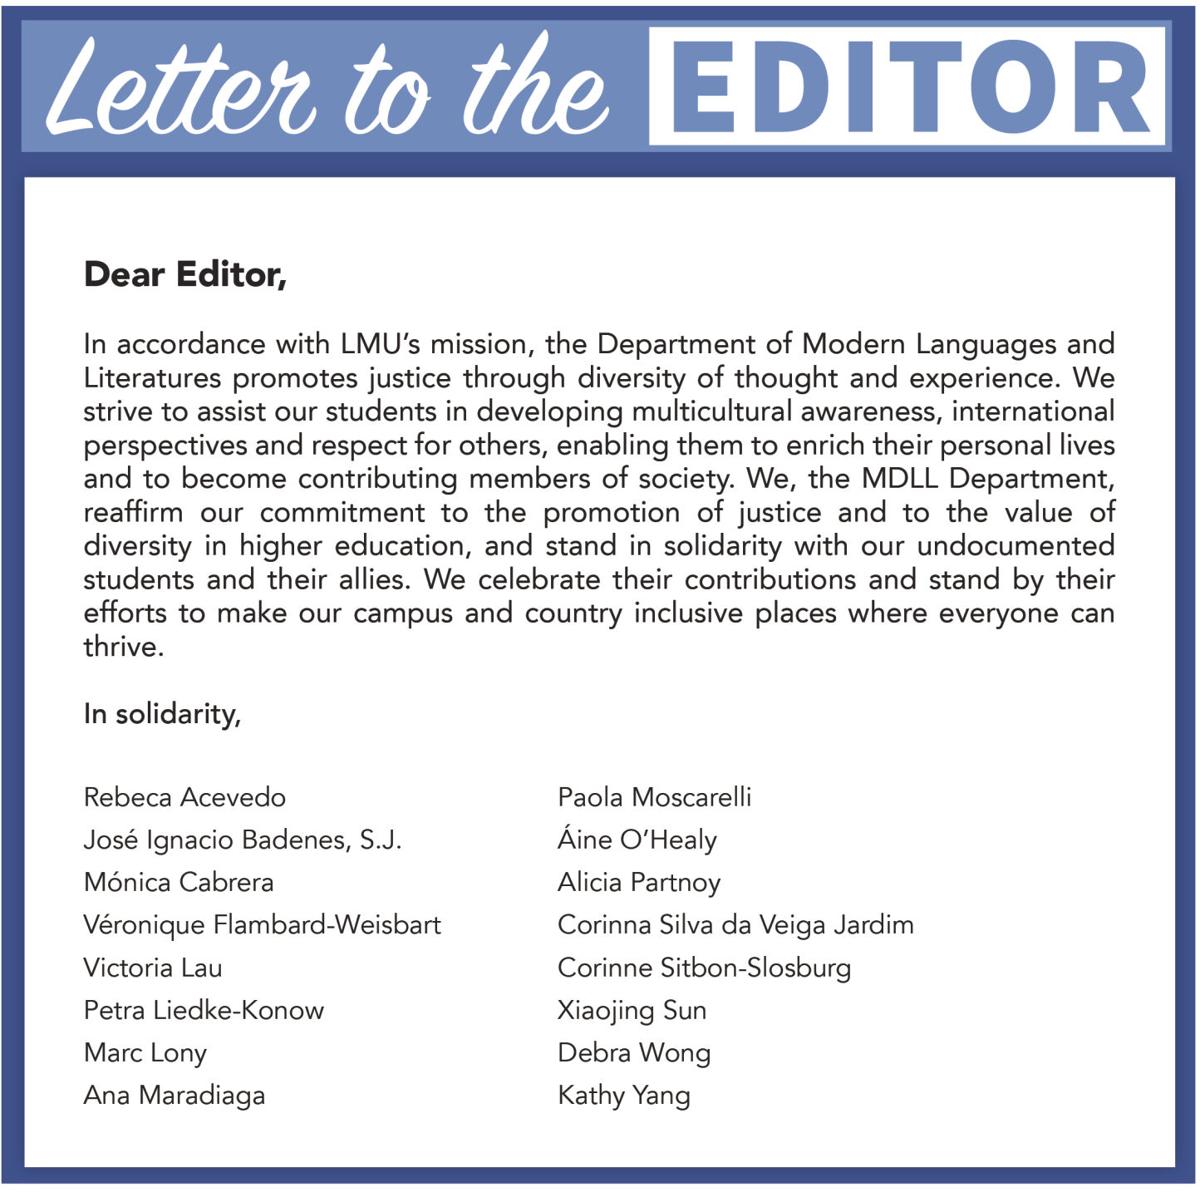 letter-to-the-editor-letters-to-the-editor-laloyolan